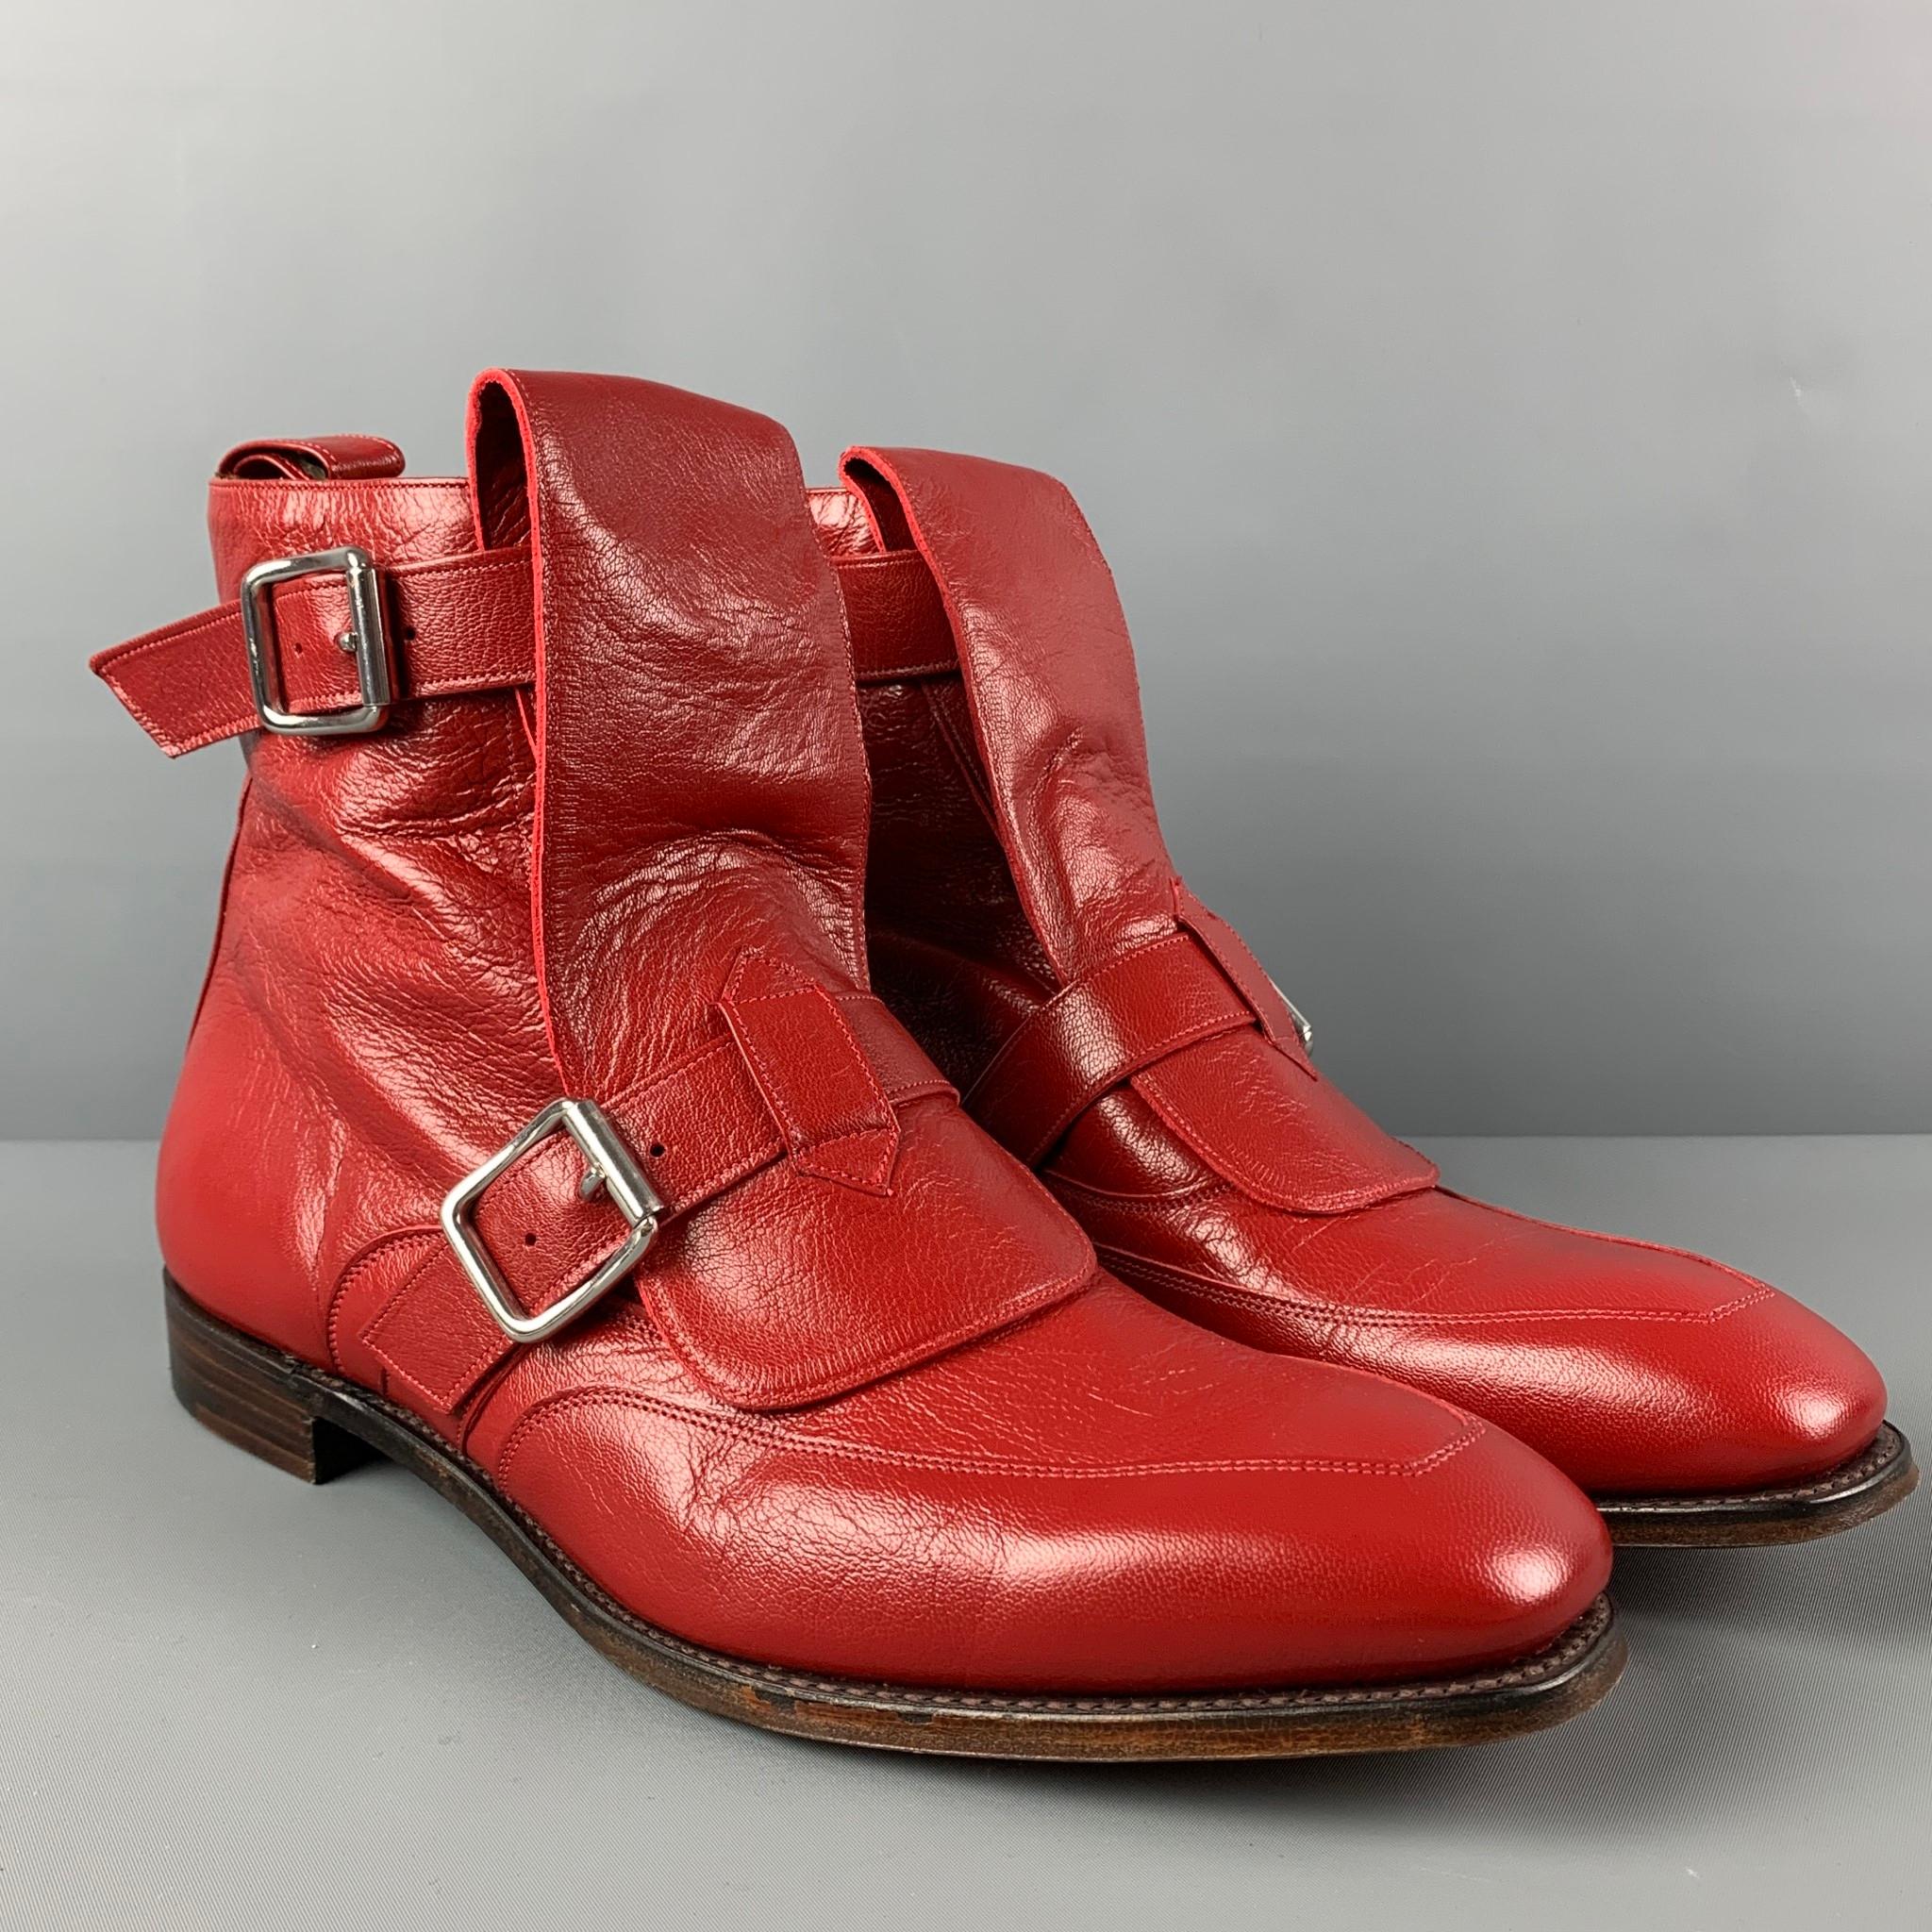 VIVIENNE WESTWOOD ankle boots comes in a red leather featuring a square toe, front flap, double buckle straps, and a lace up closure. Includes box. Made in England. 

Very Good Pre-Owned Condition.
Marked: 11

Measurements:

Length: 12.75 in.
Width: